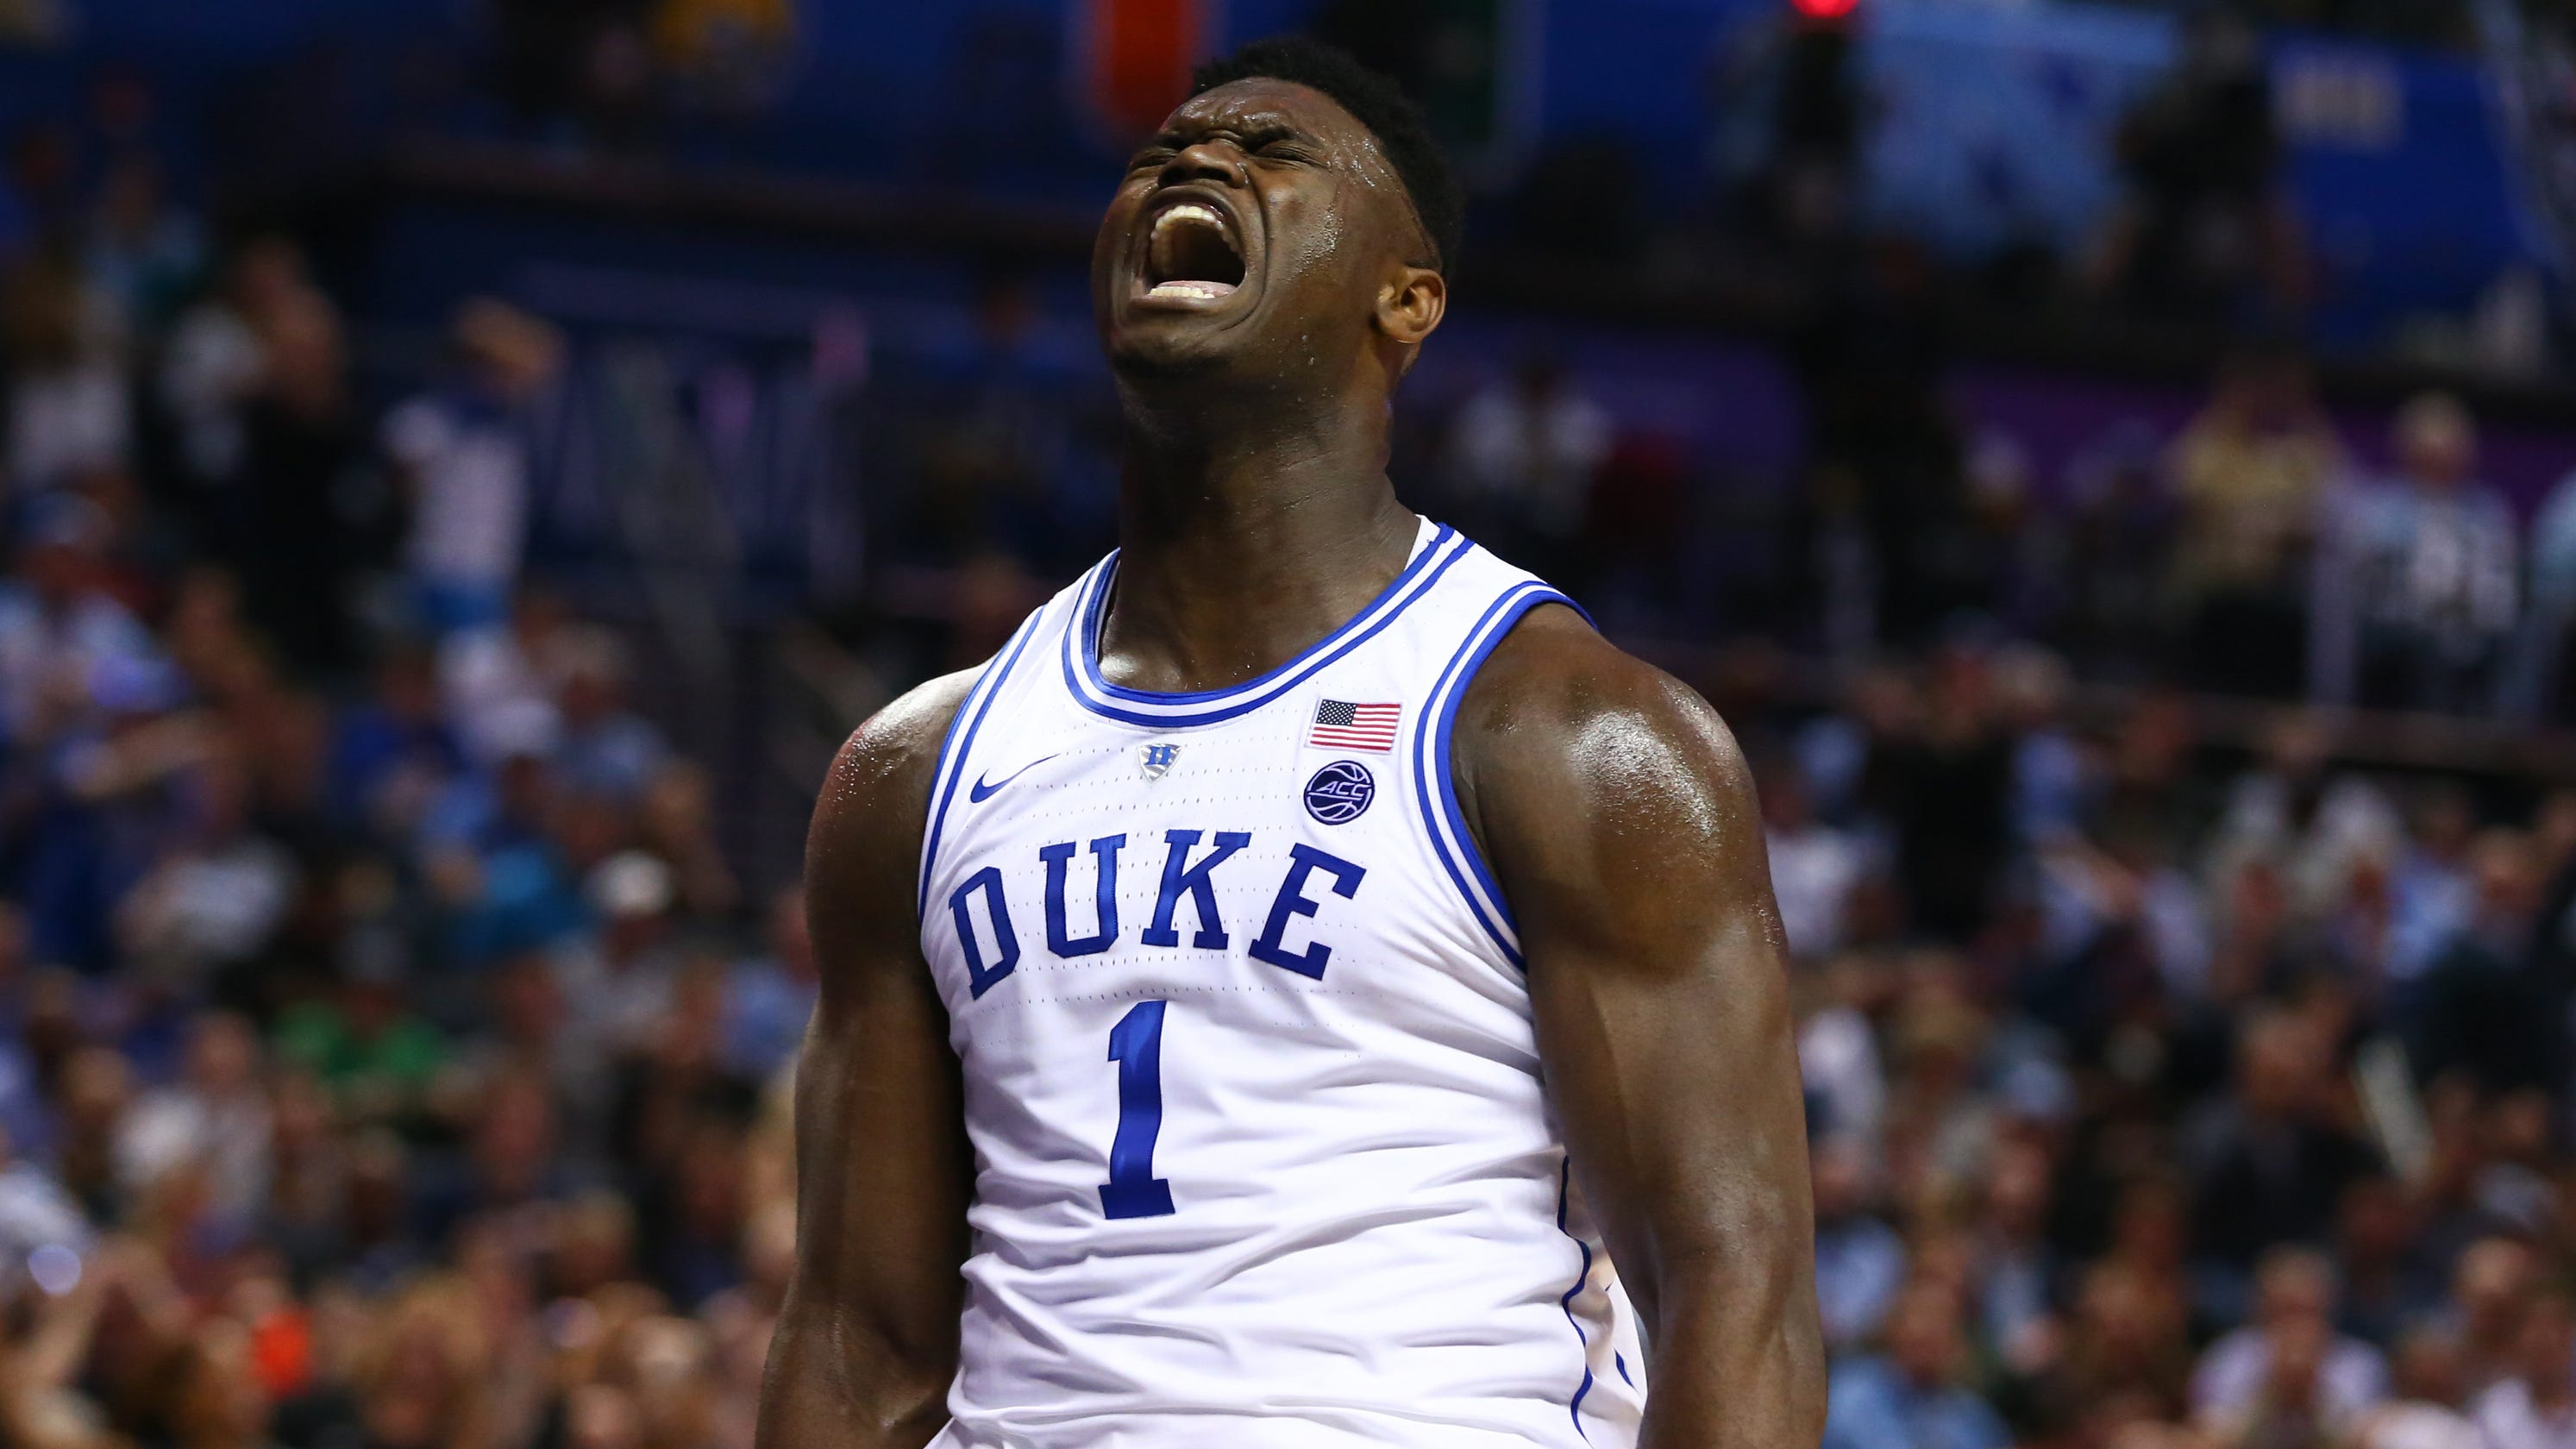 NCAA Tournament: How to watch Duke and Zion Williamson